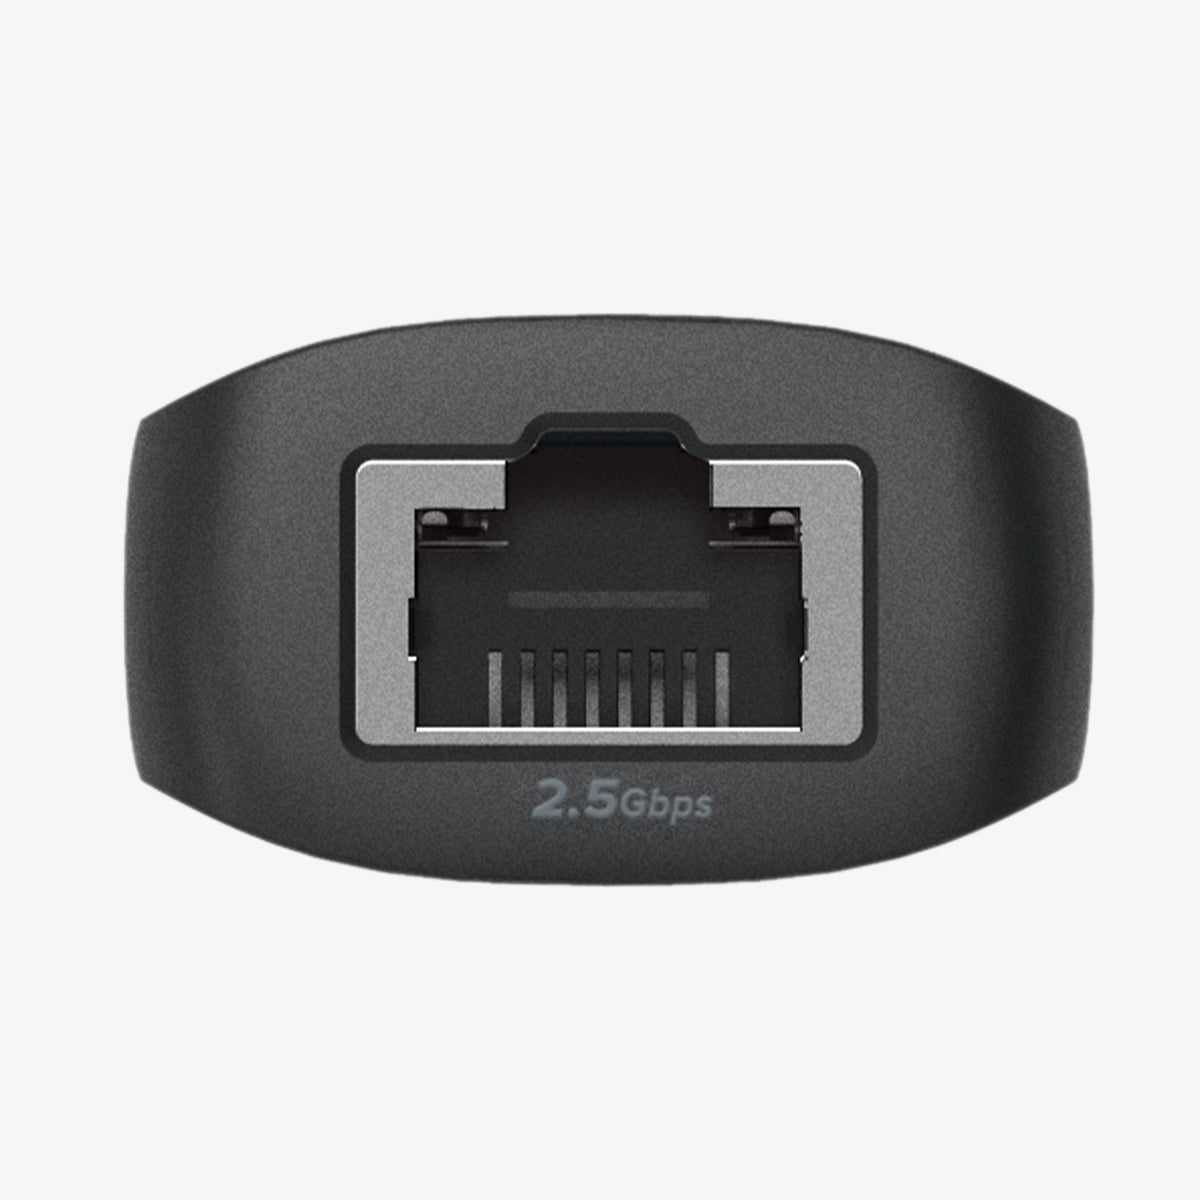 ACA06193 - ArcDock Pro Multi Hub 6-in-1 PD2302 in Space Gray showing the 2.5Gbps Ethernet port